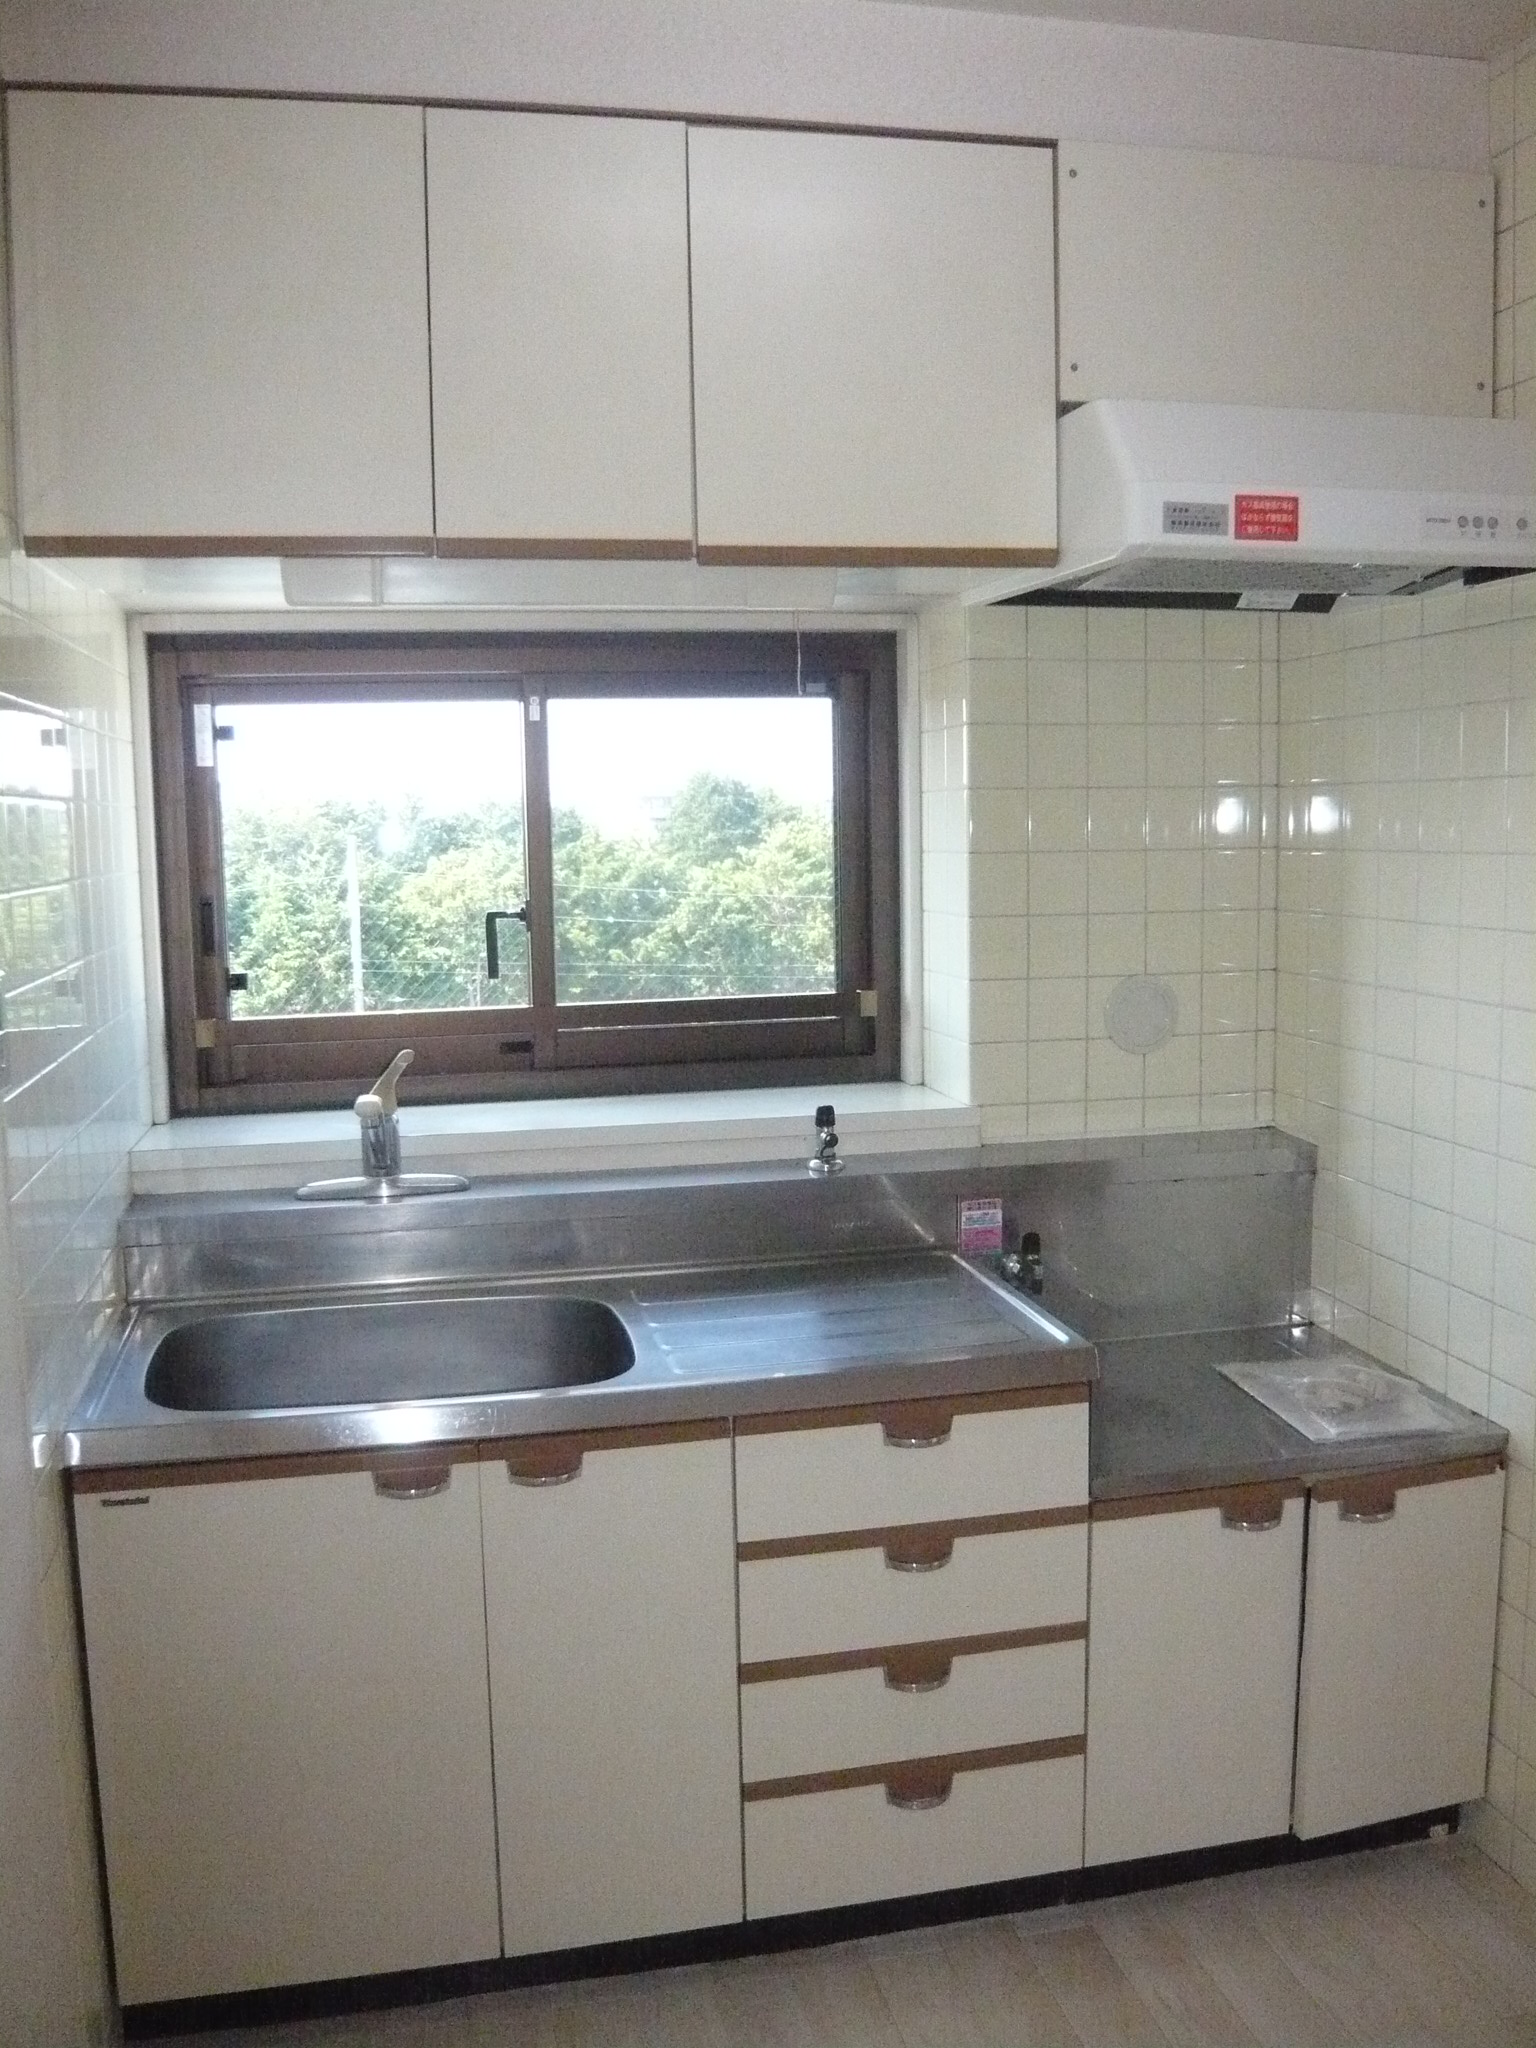 Kitchen. Your favorite gas stove installation Allowed